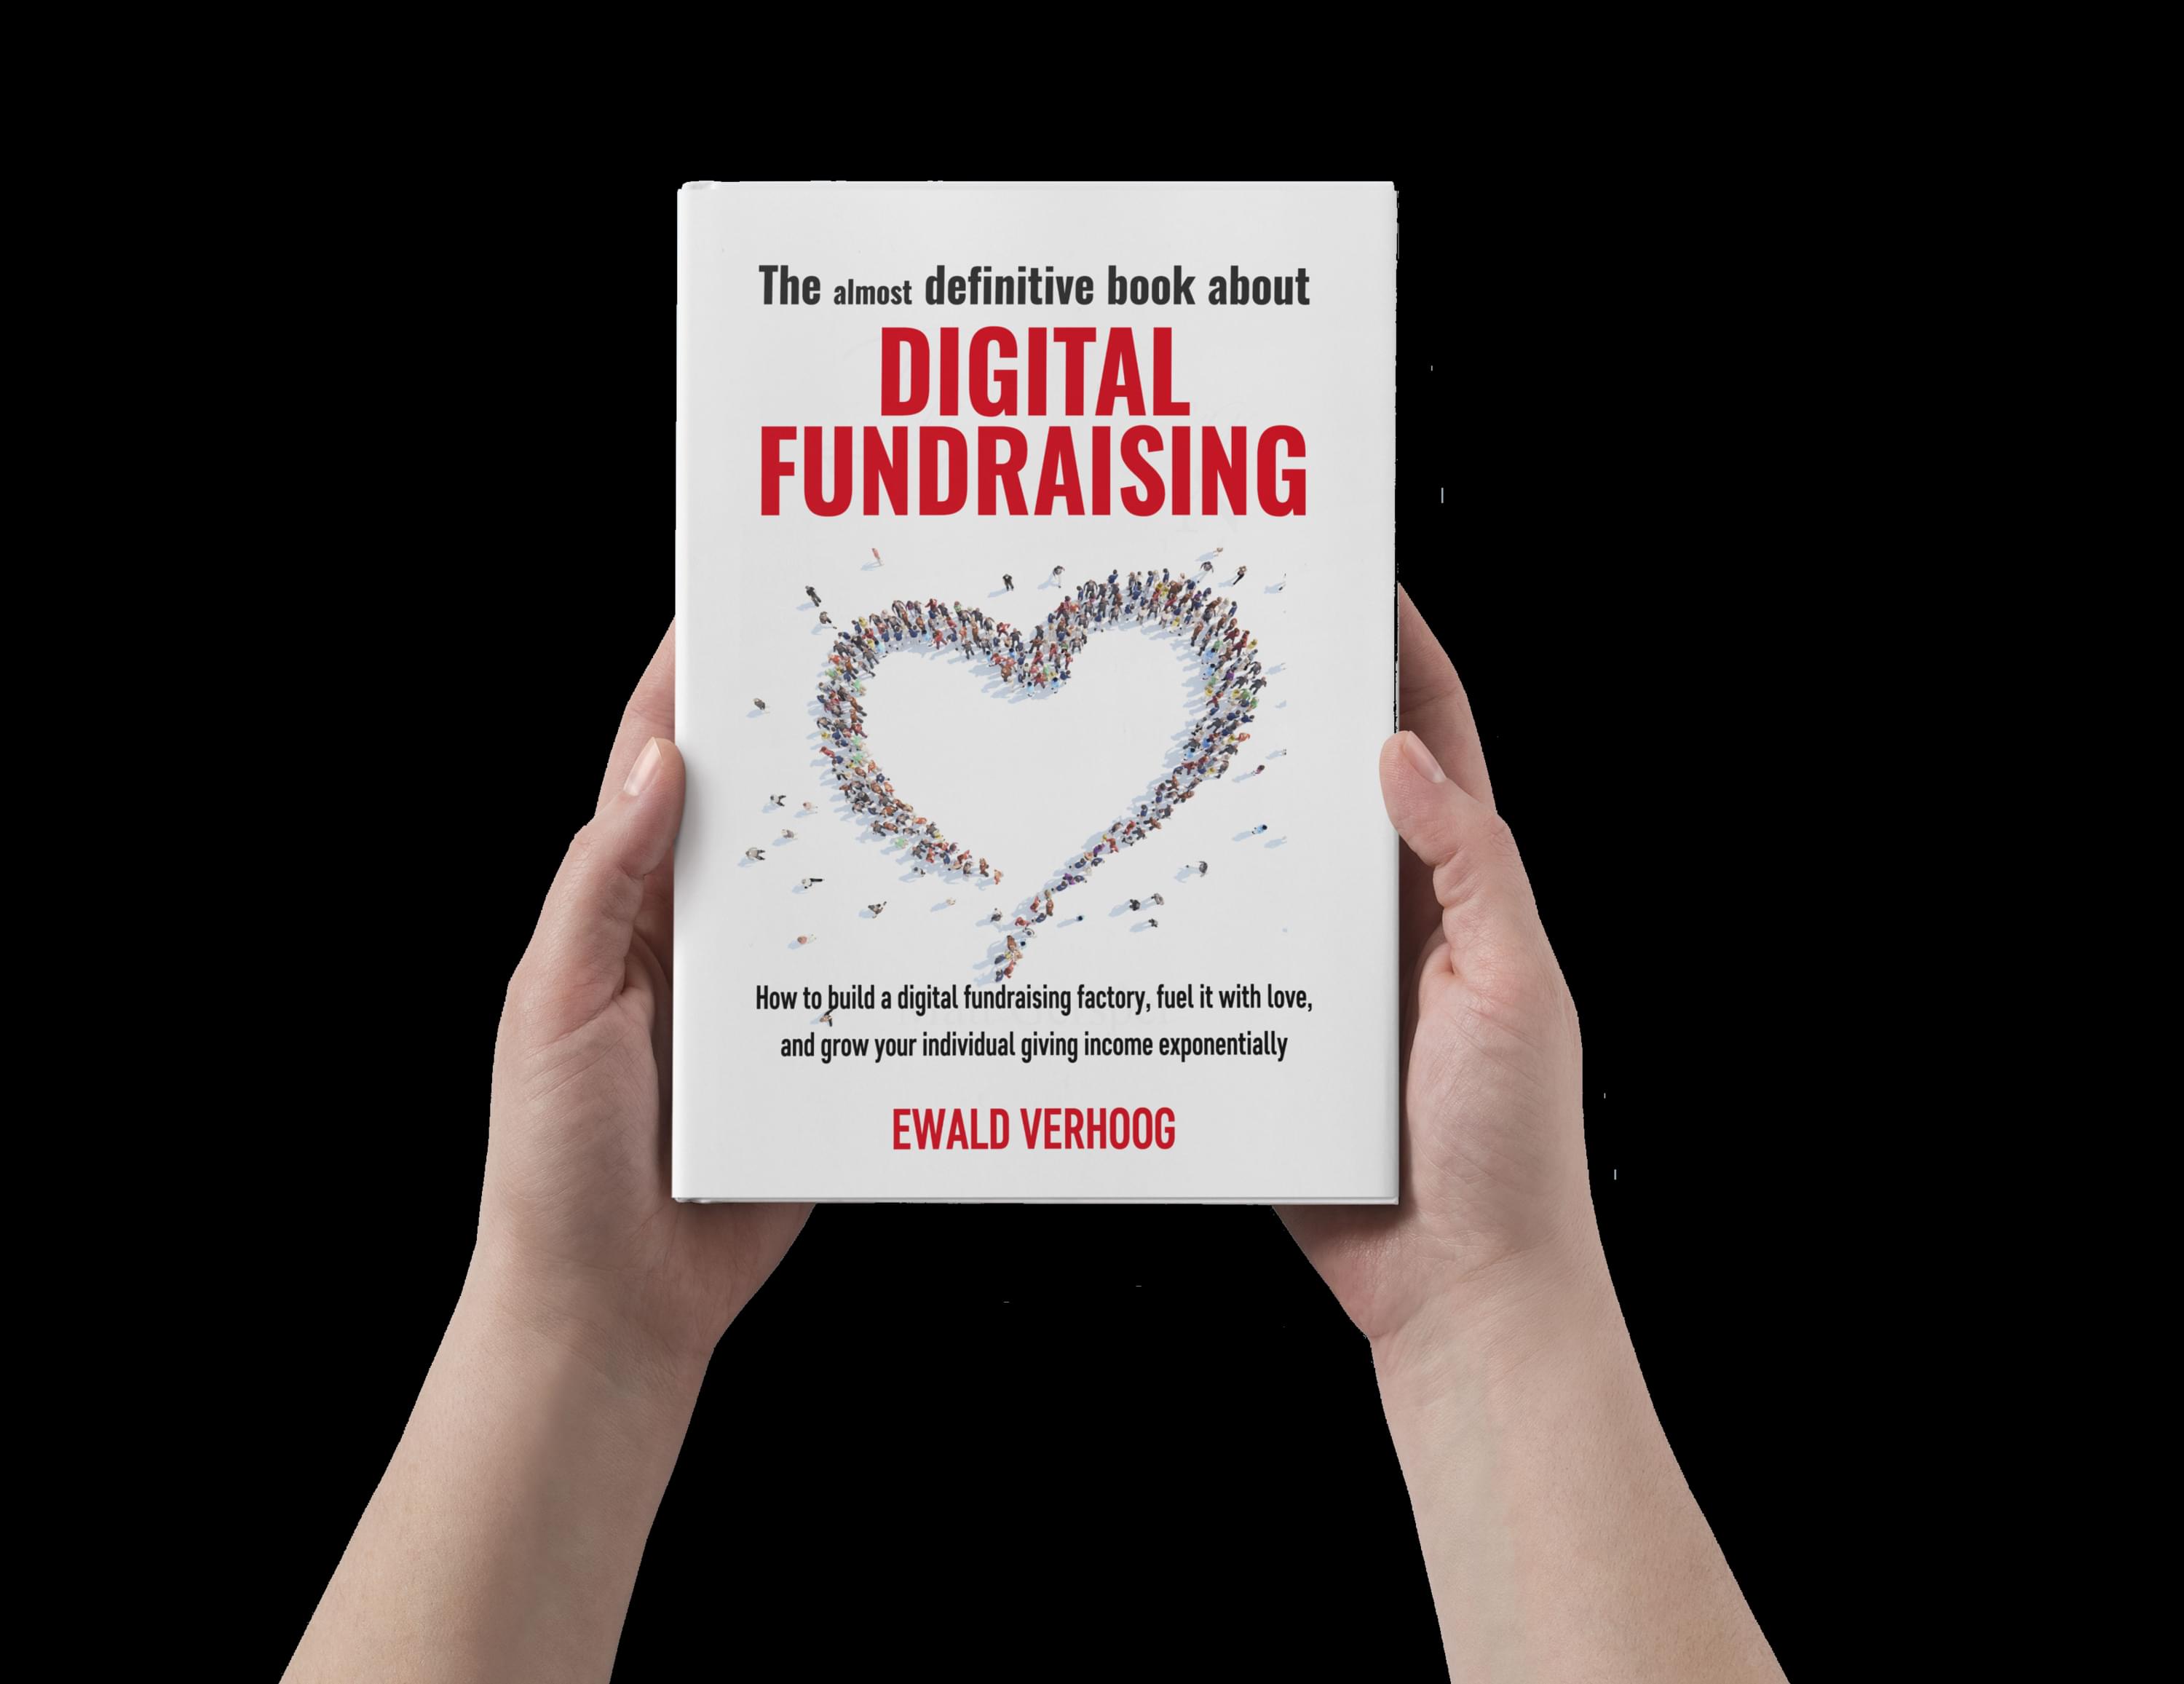 The Book about Digital Fundraising